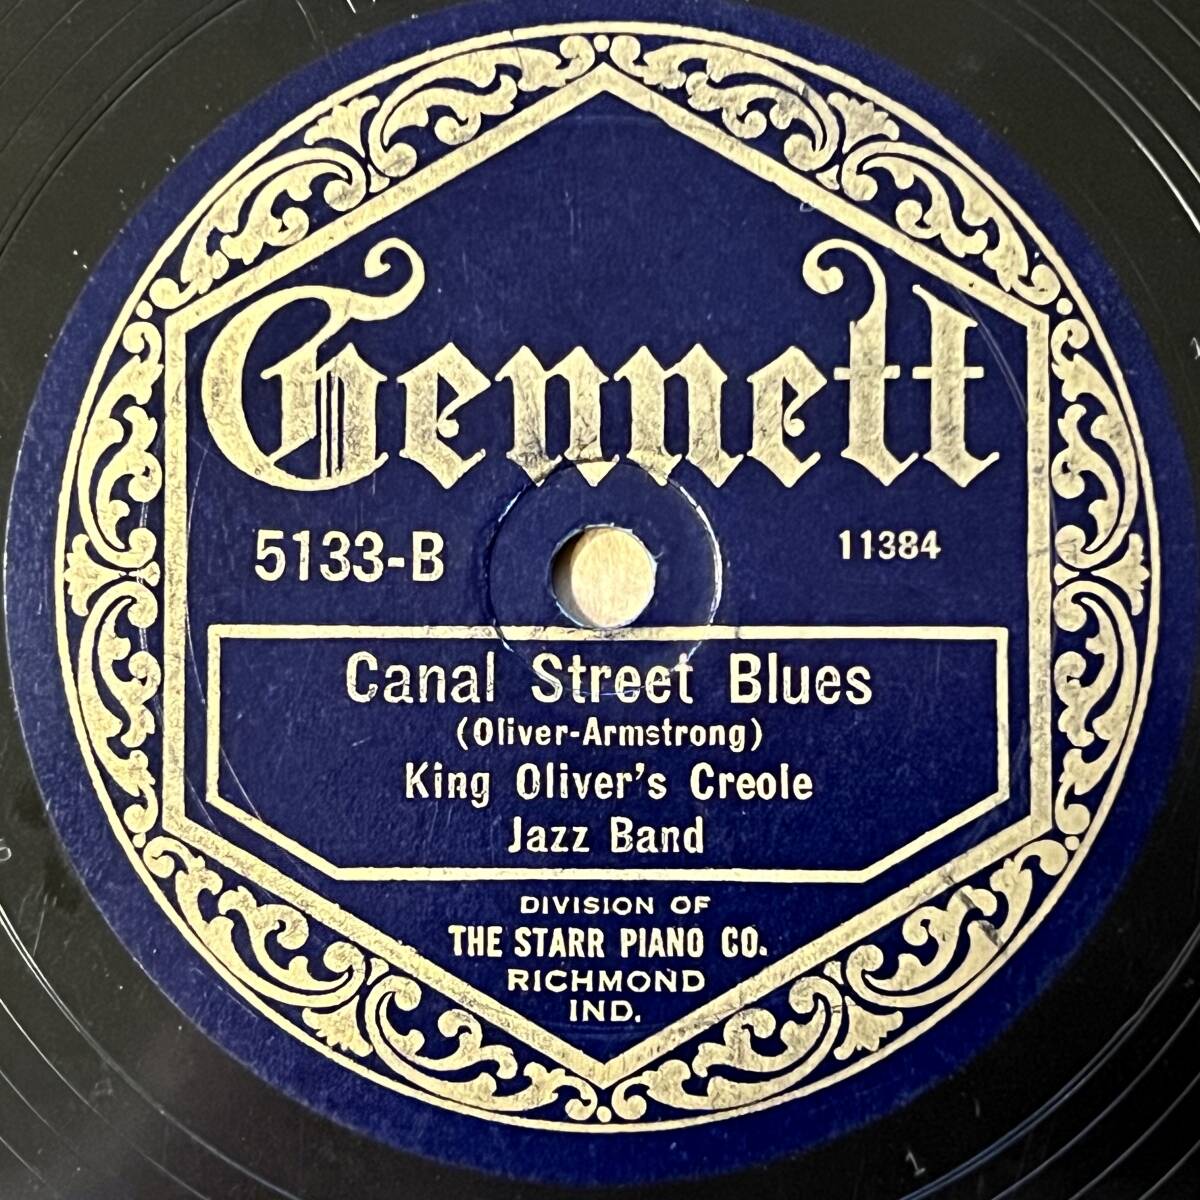 KING OLIVER'S CREOLE JAZZ BAND w LOUIS ARMSTRONG GENNETT 初録音 Just Gone/ Canal Street Blues